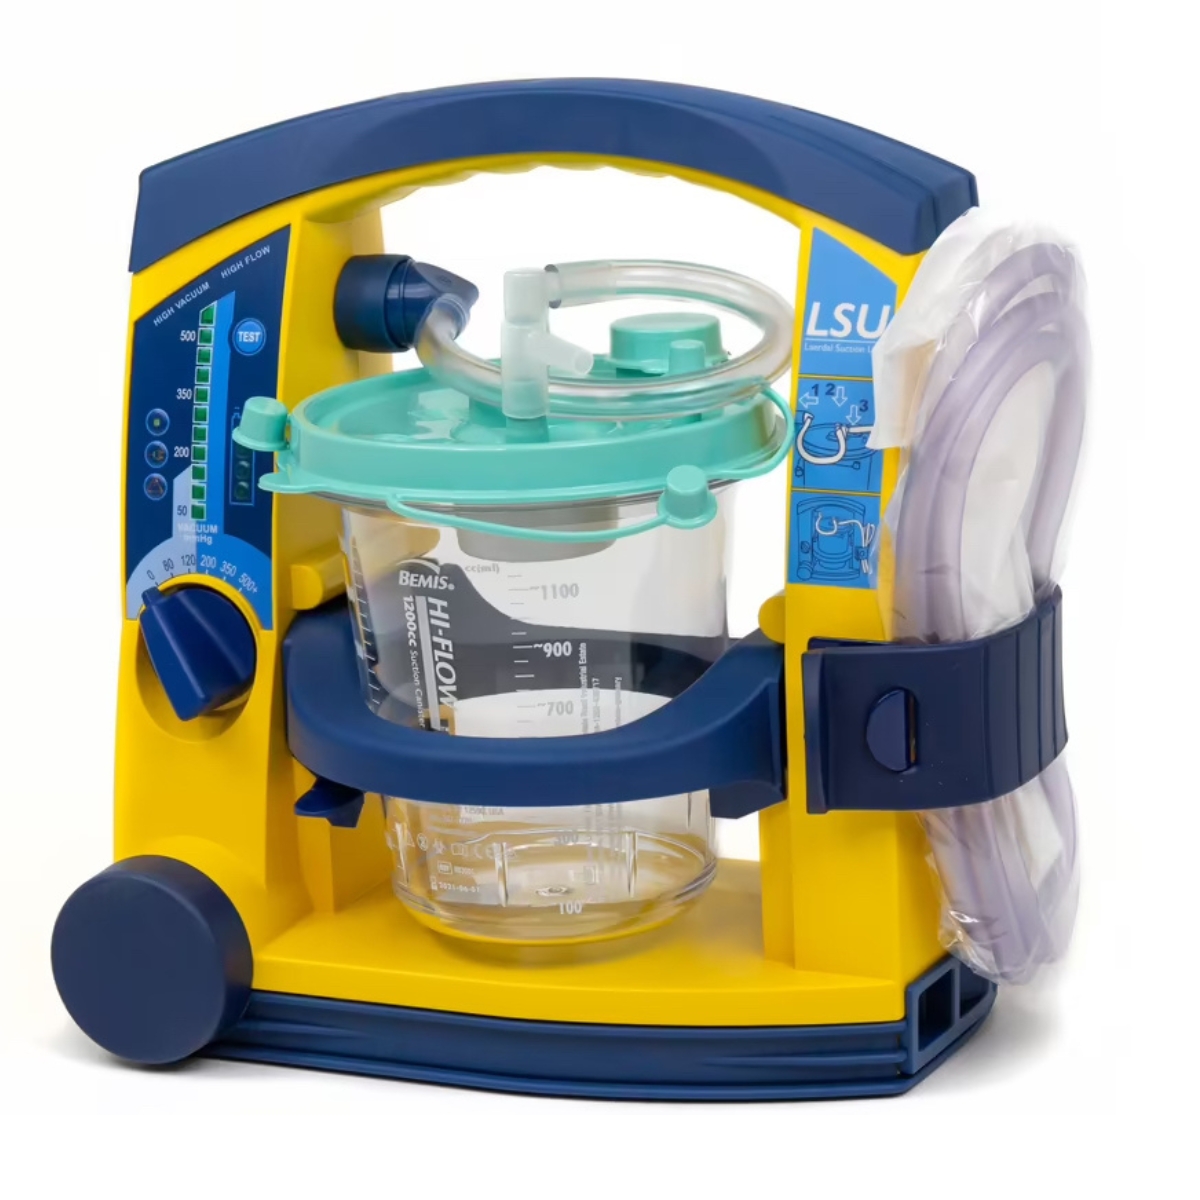 Laerdal Suction Unit with Disposable Bemis Canister - 3013407 - W47078 - Laerdal - 78002001 - Airway Management Adult